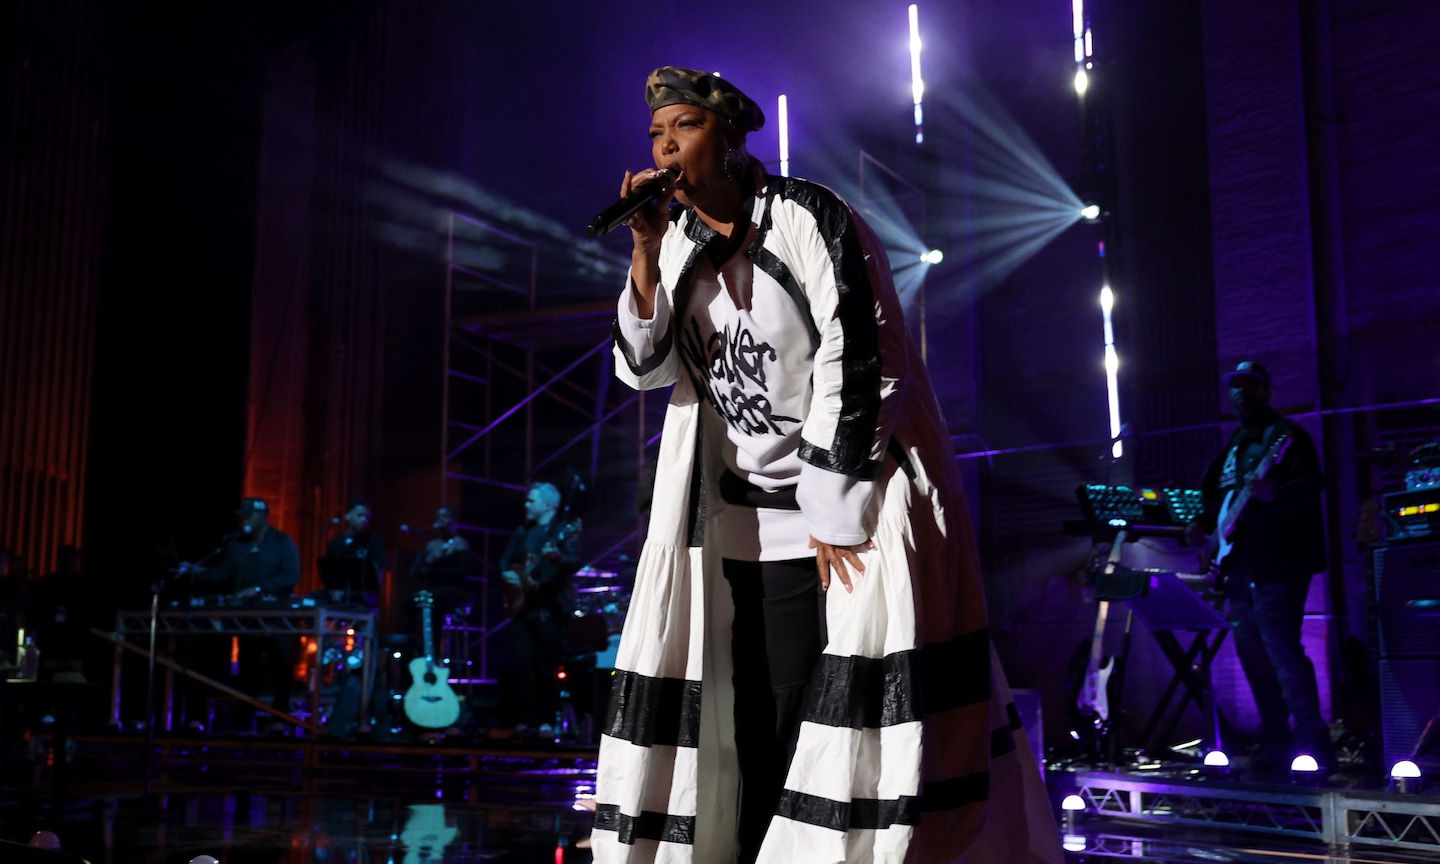 ‘MTV Unplugged’ To Air New Jersey Hip-Hop 50 Special Featuring Queen Latifah, Redman, And More